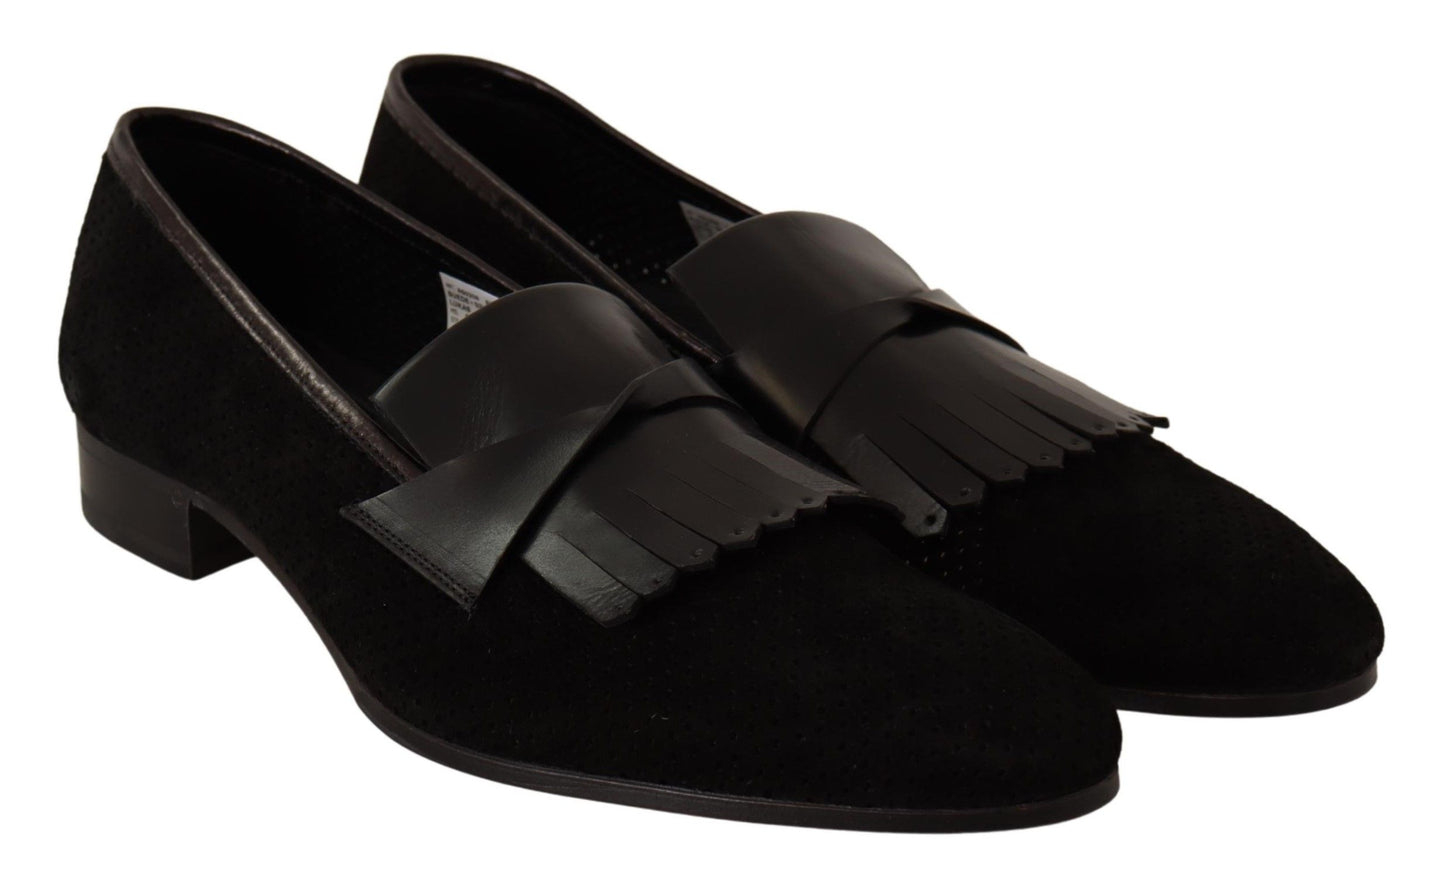 Elegant Suede Loafers For Sophisticated Style